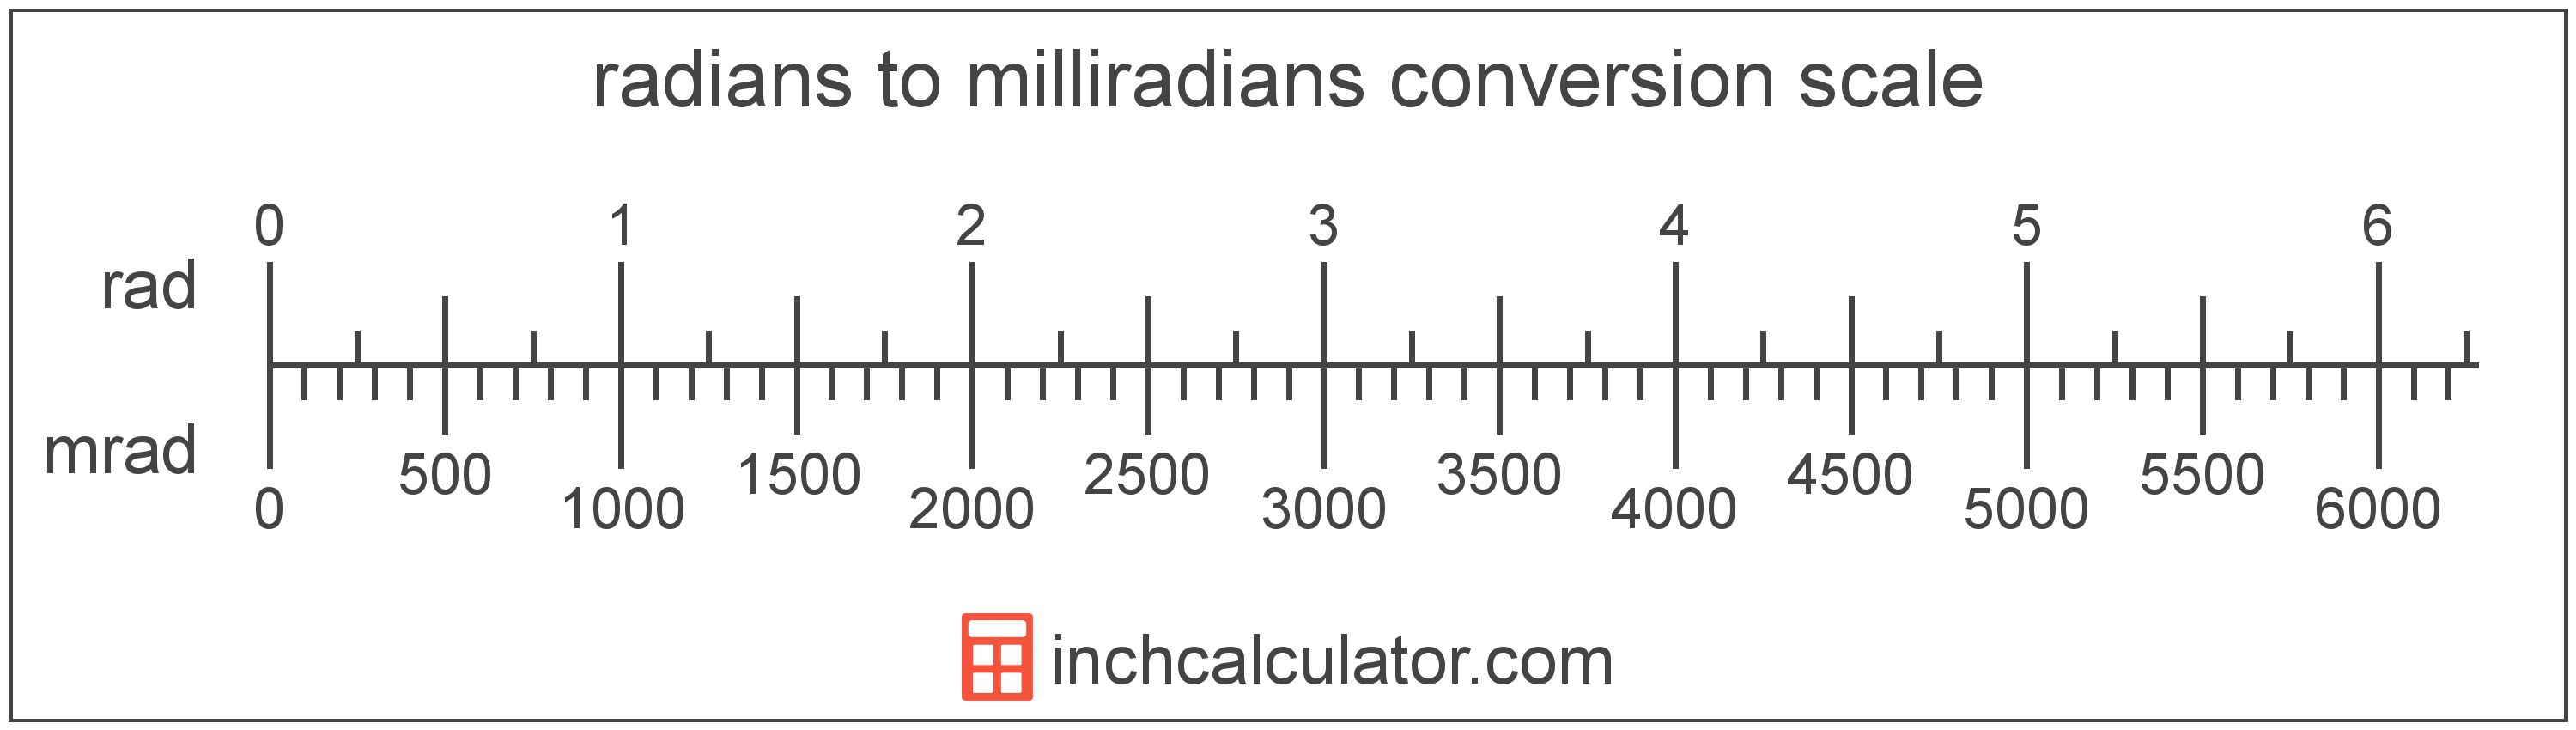 conversion scale showing radians and equivalent milliradians angle values